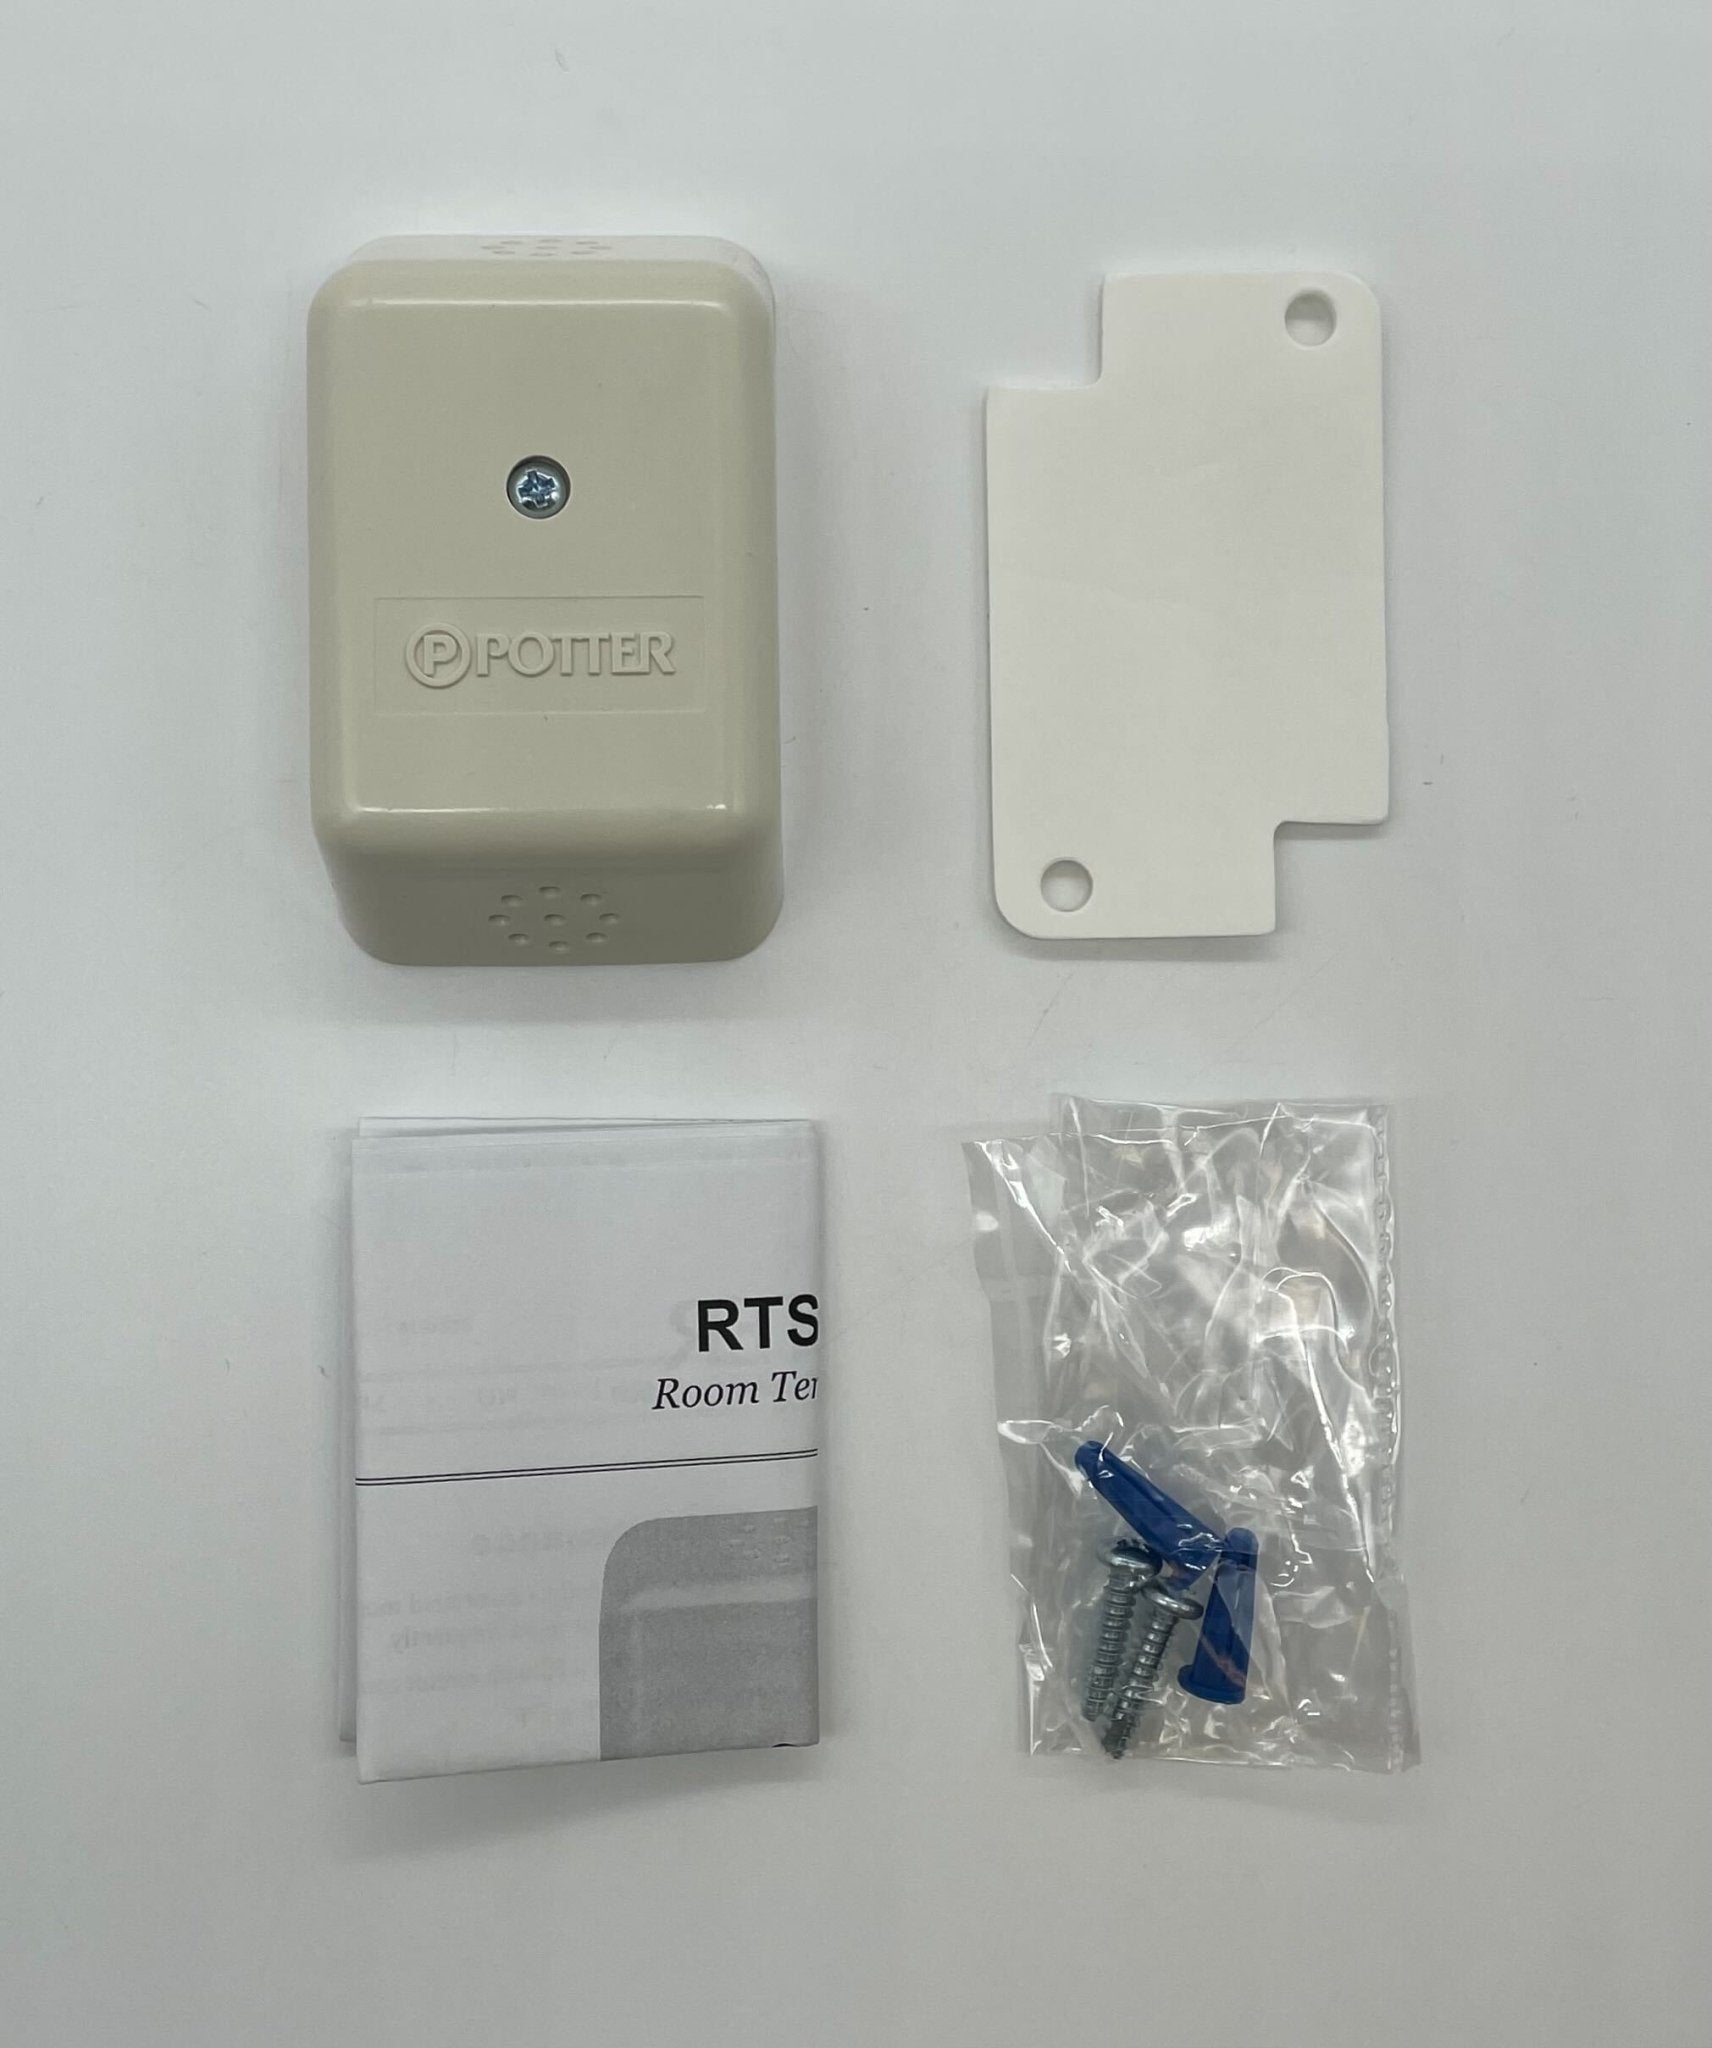 Potter RTS-O - The Fire Alarm Supplier